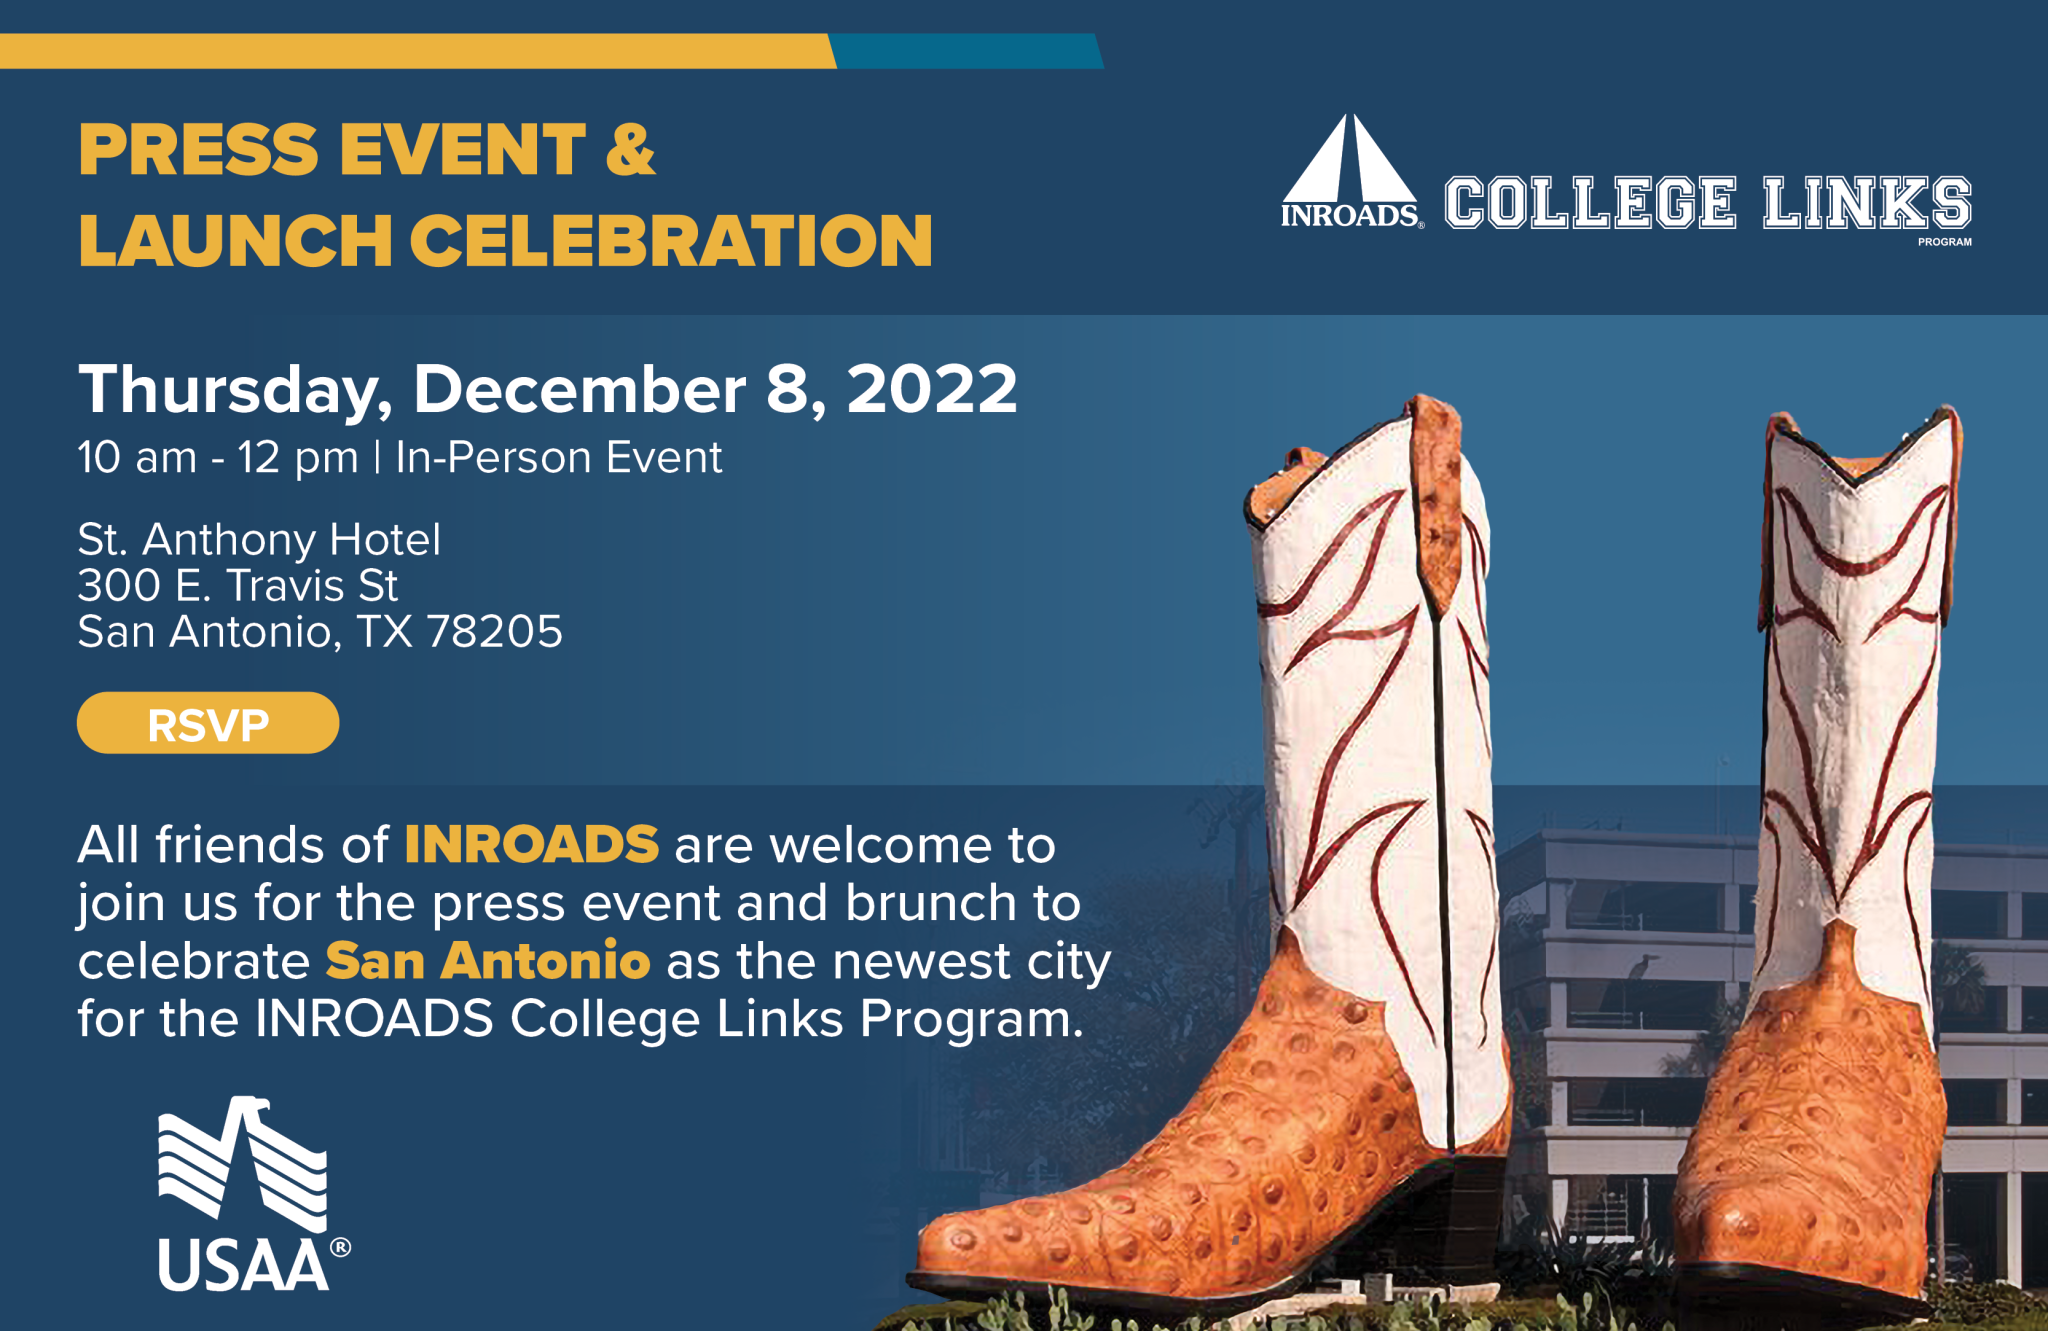 Featured image for “INROADS COLLEGE LINKS TO LAUNCH IN SAN ANTONIO WITH USAA SUPPORT”